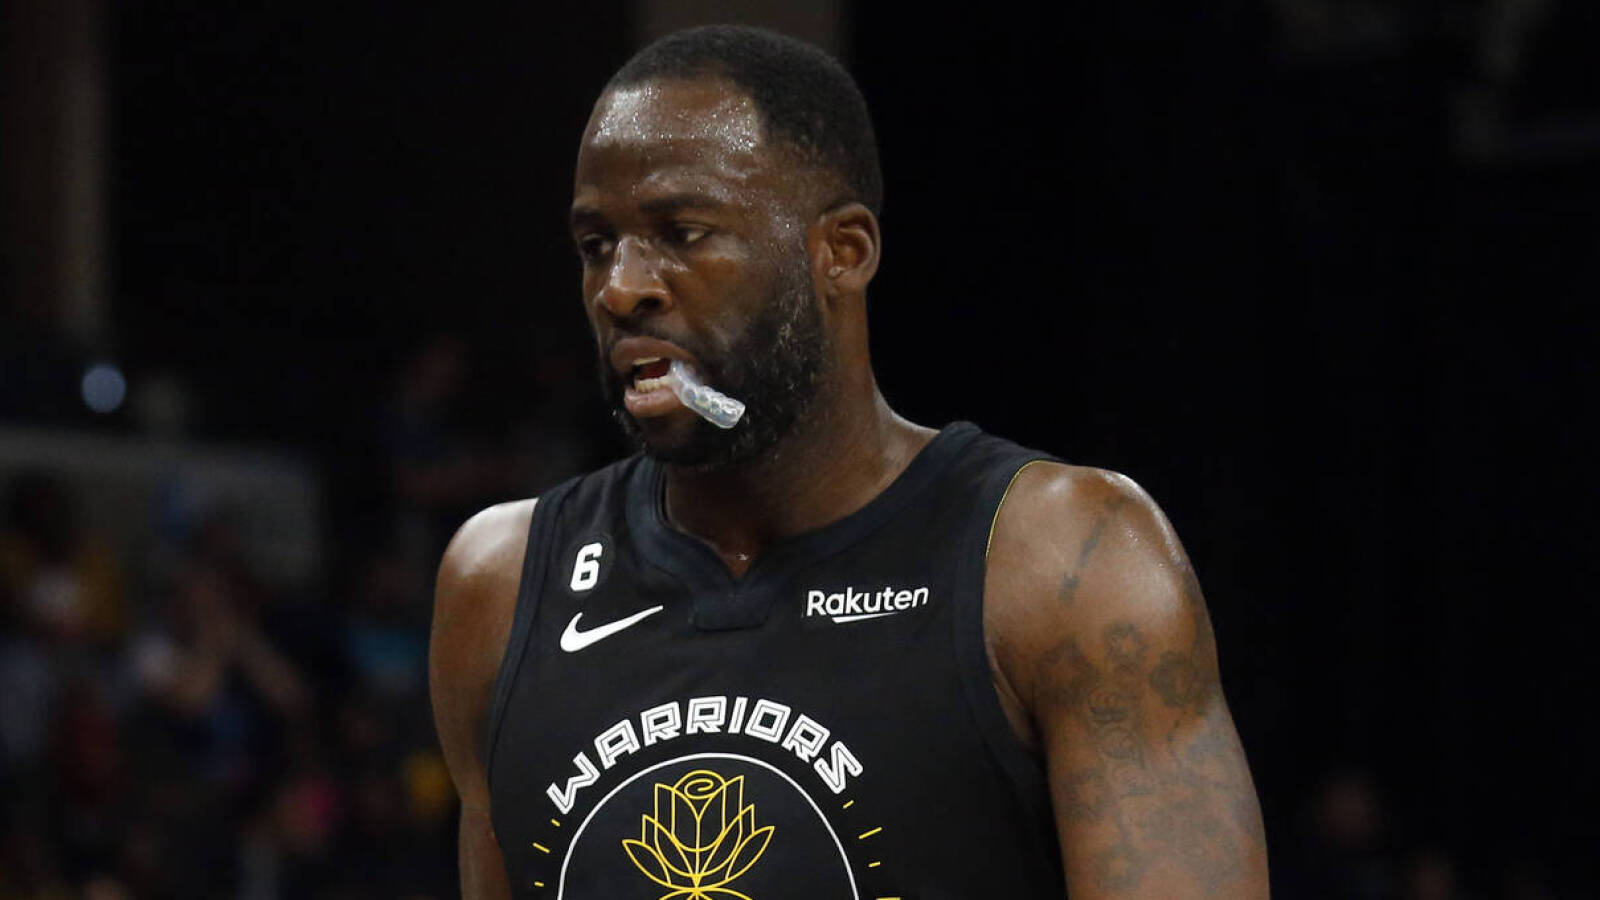 Draymond Green breaks silence on controversial suspension